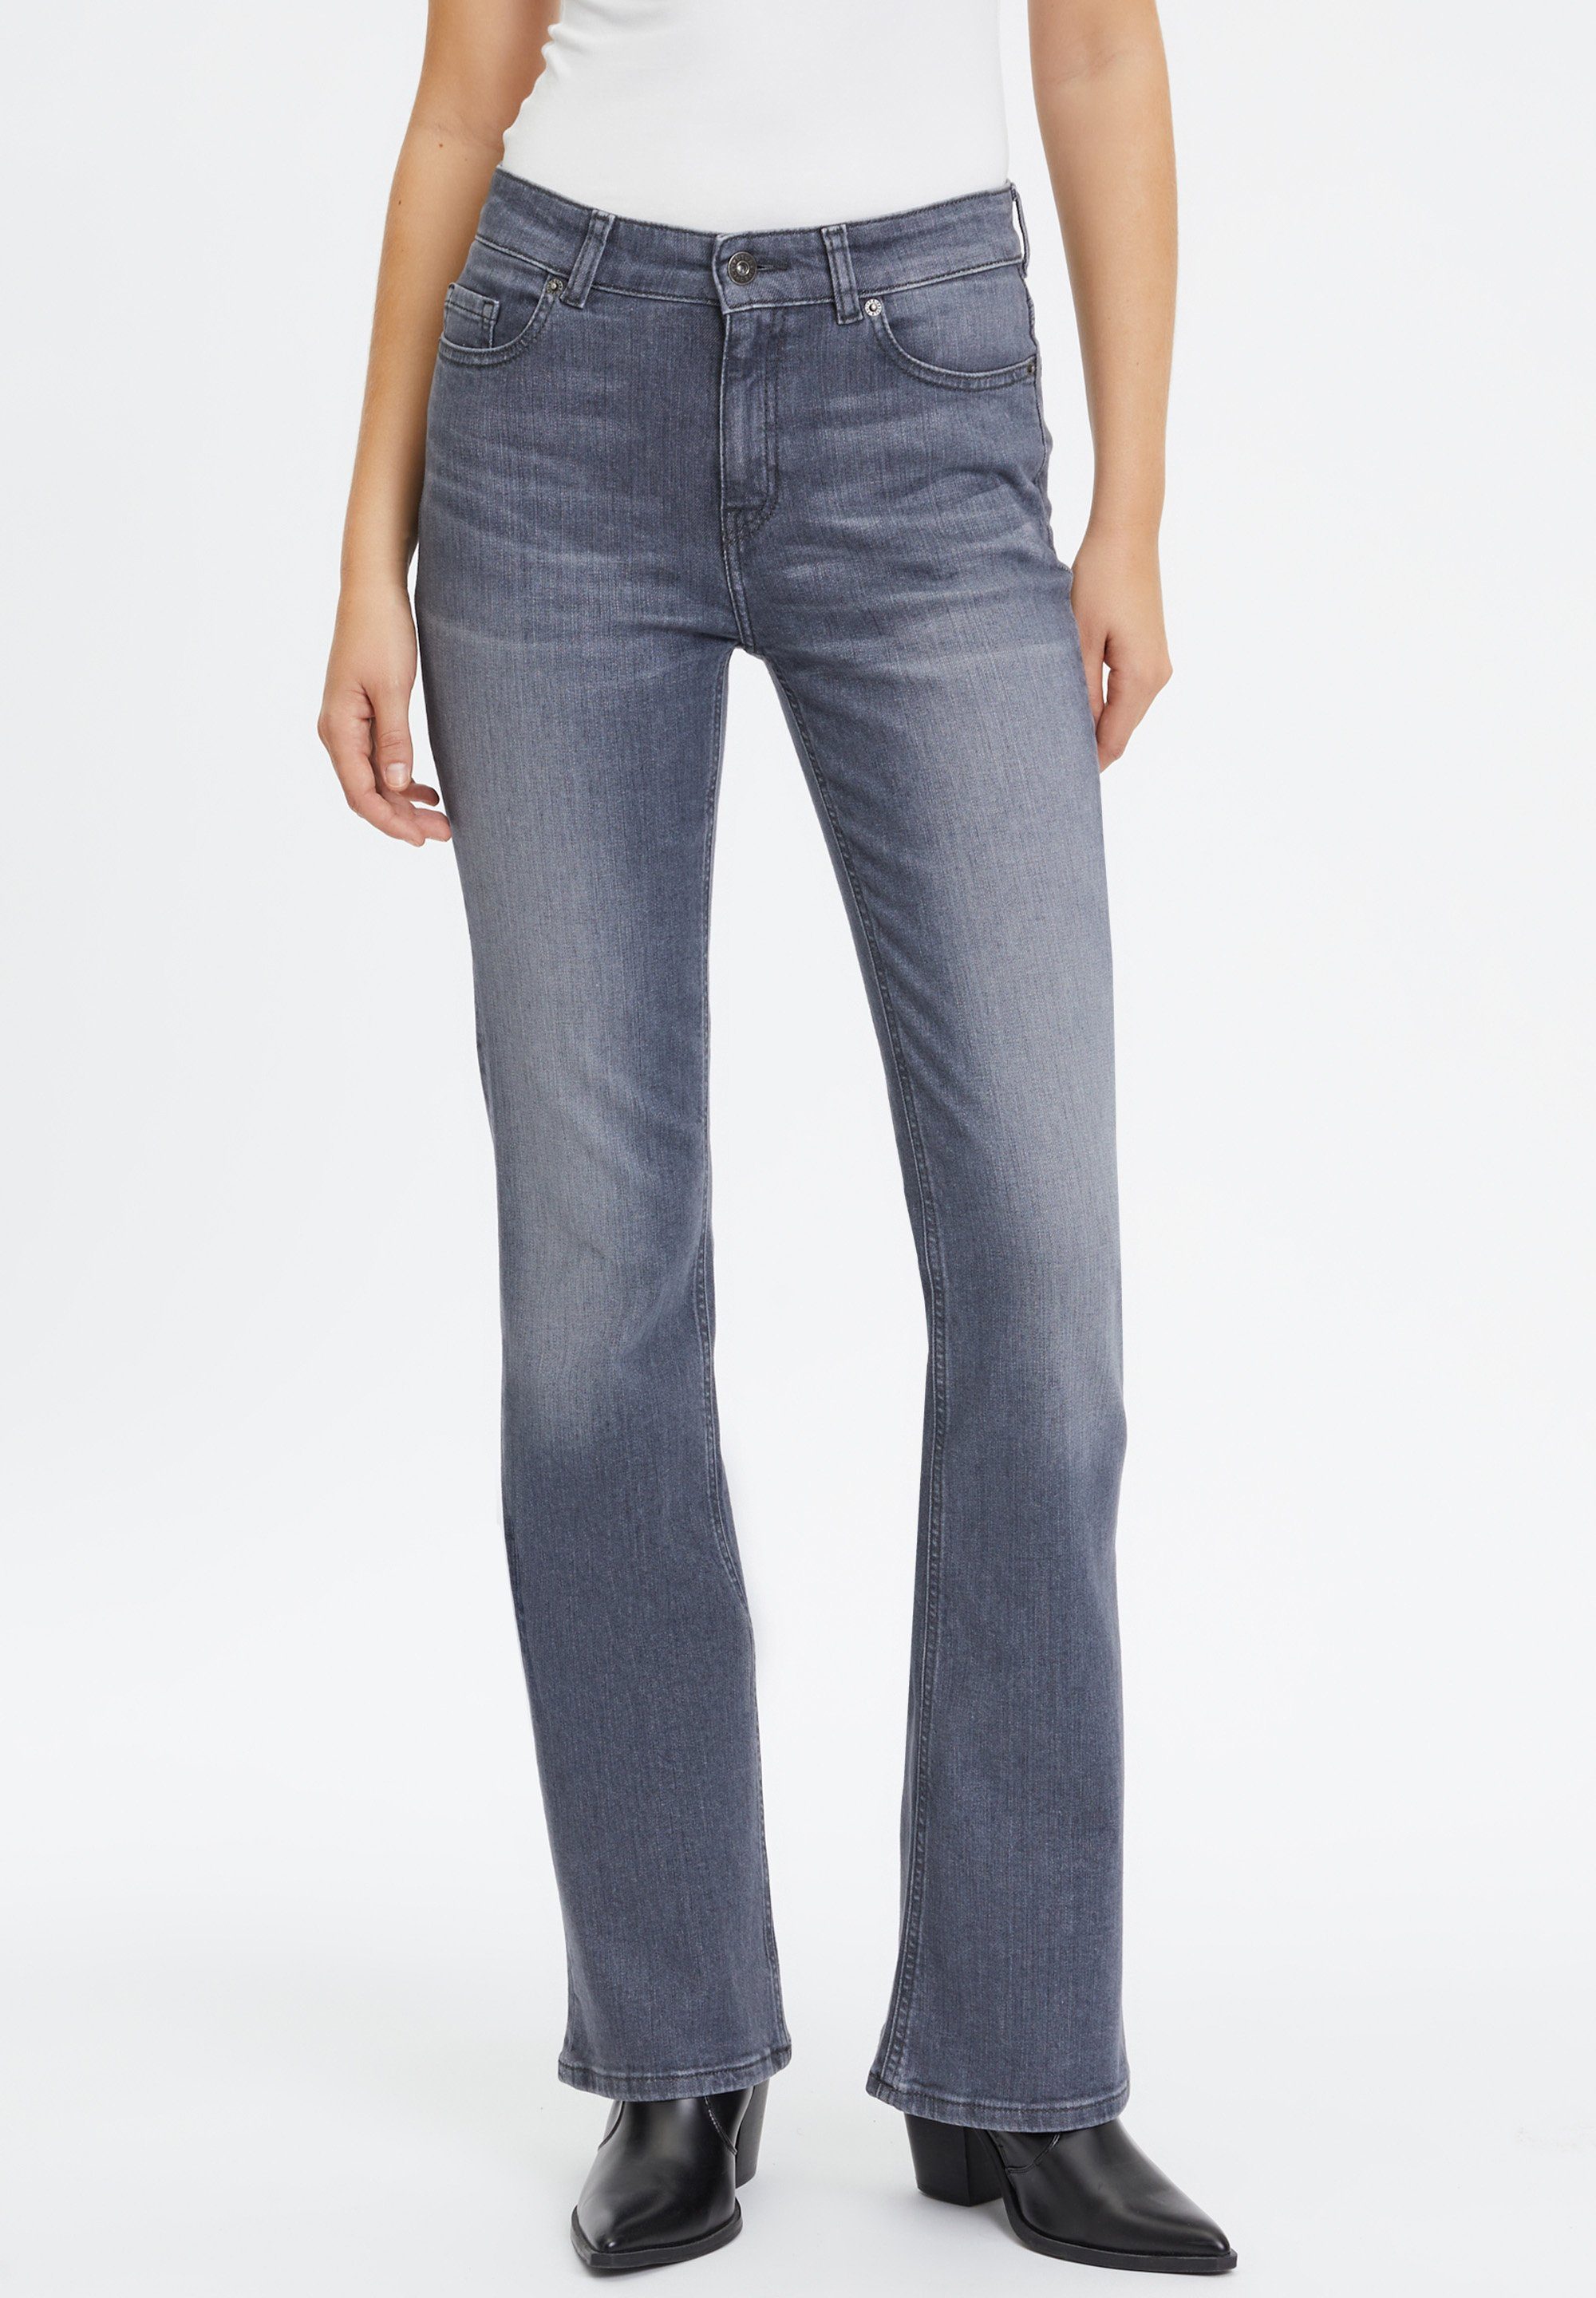 AUTHENTIC for FUTURE:PEOPLE. WAIST Care #WeC4F - - MID BOOTCUT Future. 01:02 USED GREY We Slim-fit-Jeans